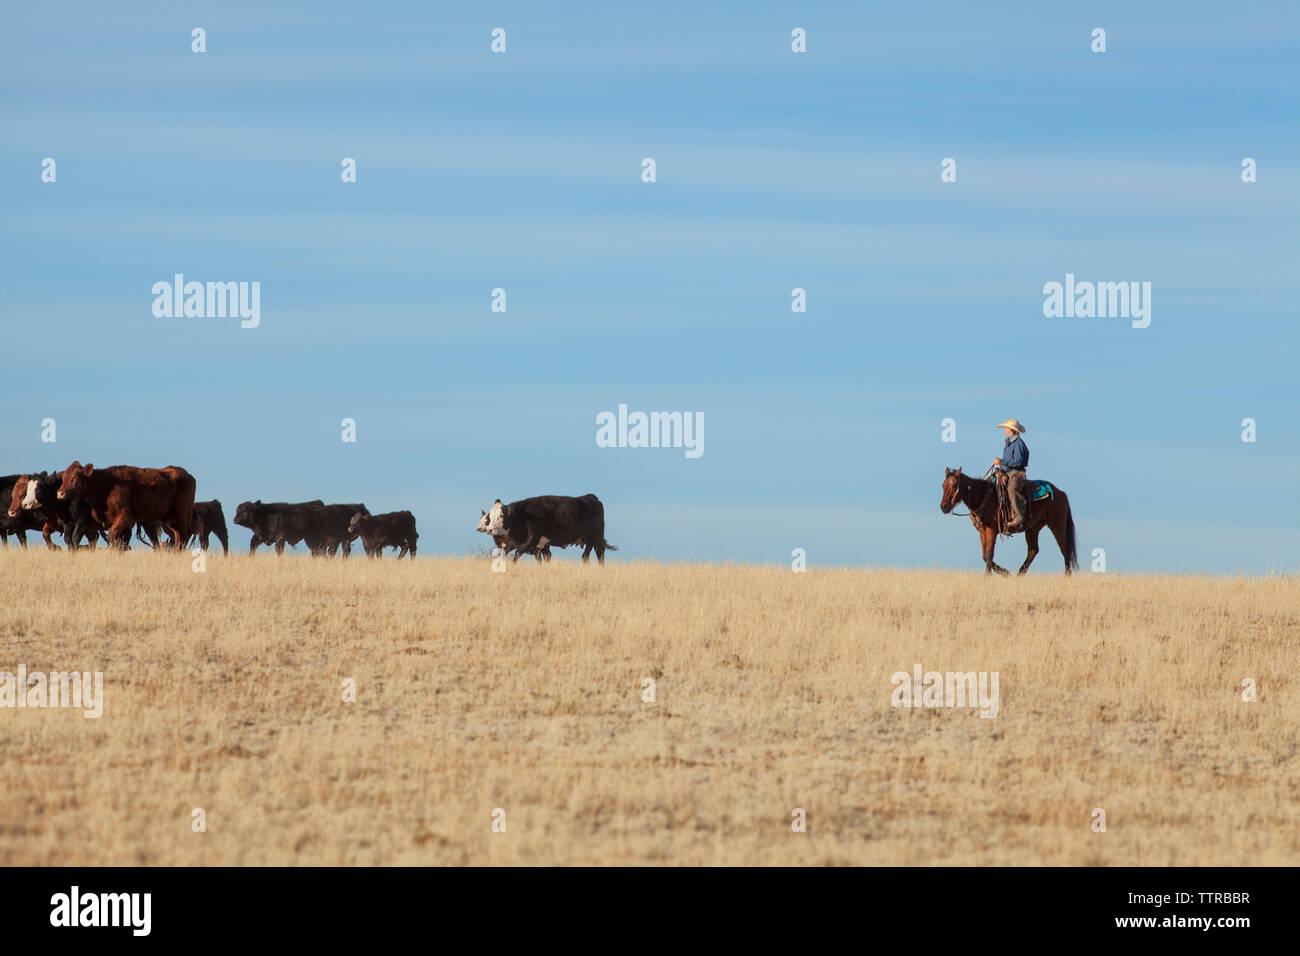 Teenage cowboy herding cattle while riding hose on field against blue sky Stock Photo